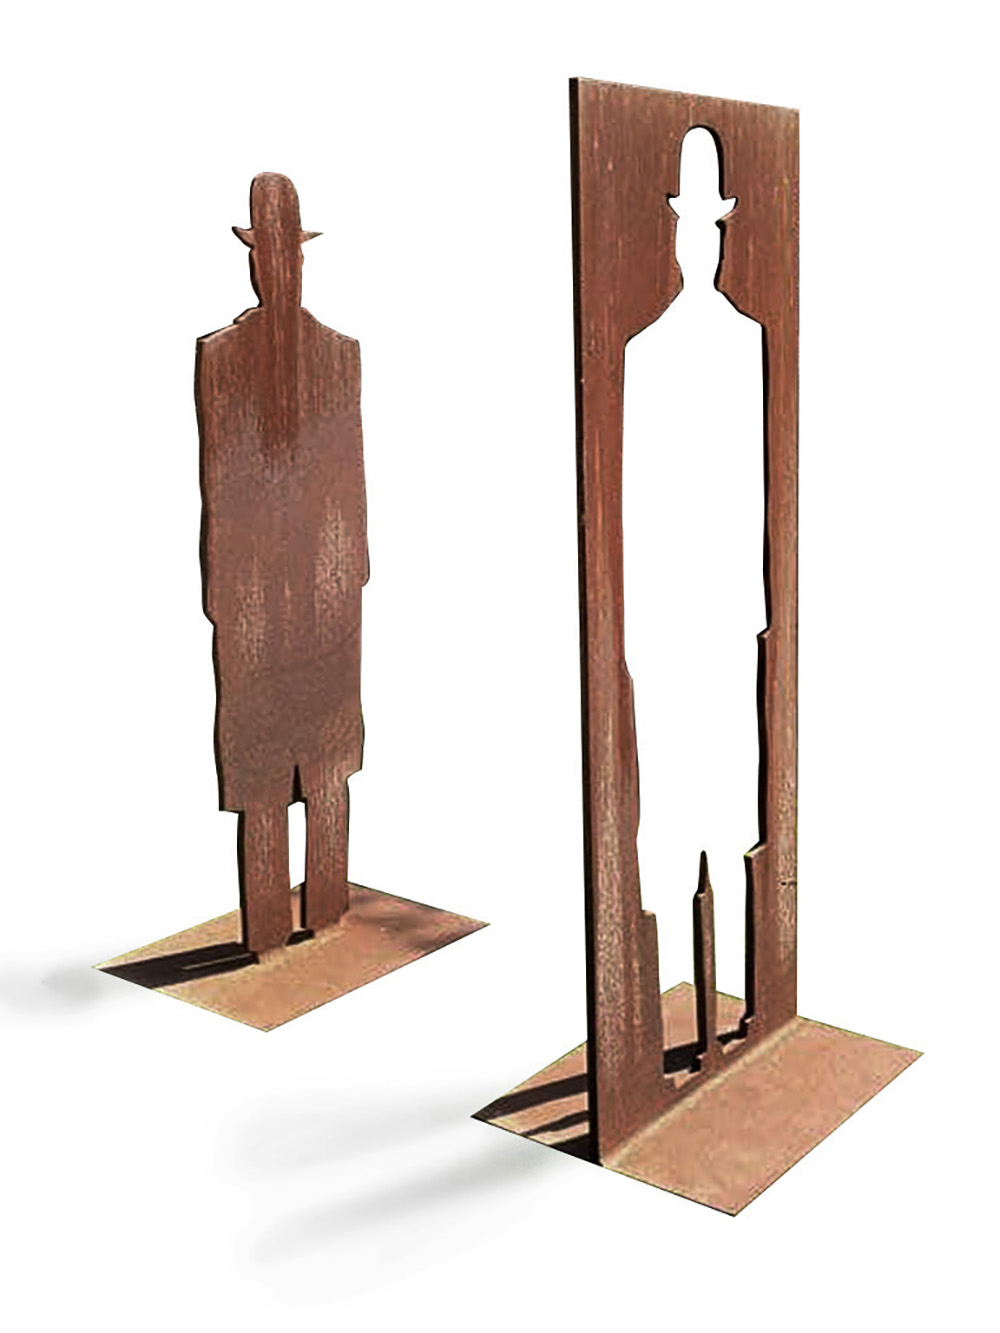 JOSÉ LUIS PASCUAL SAMARANCH (Barcelona, 1947). "Homage to Magritte". 2005. Corten steel. Size: 240 x - Image 4 of 11